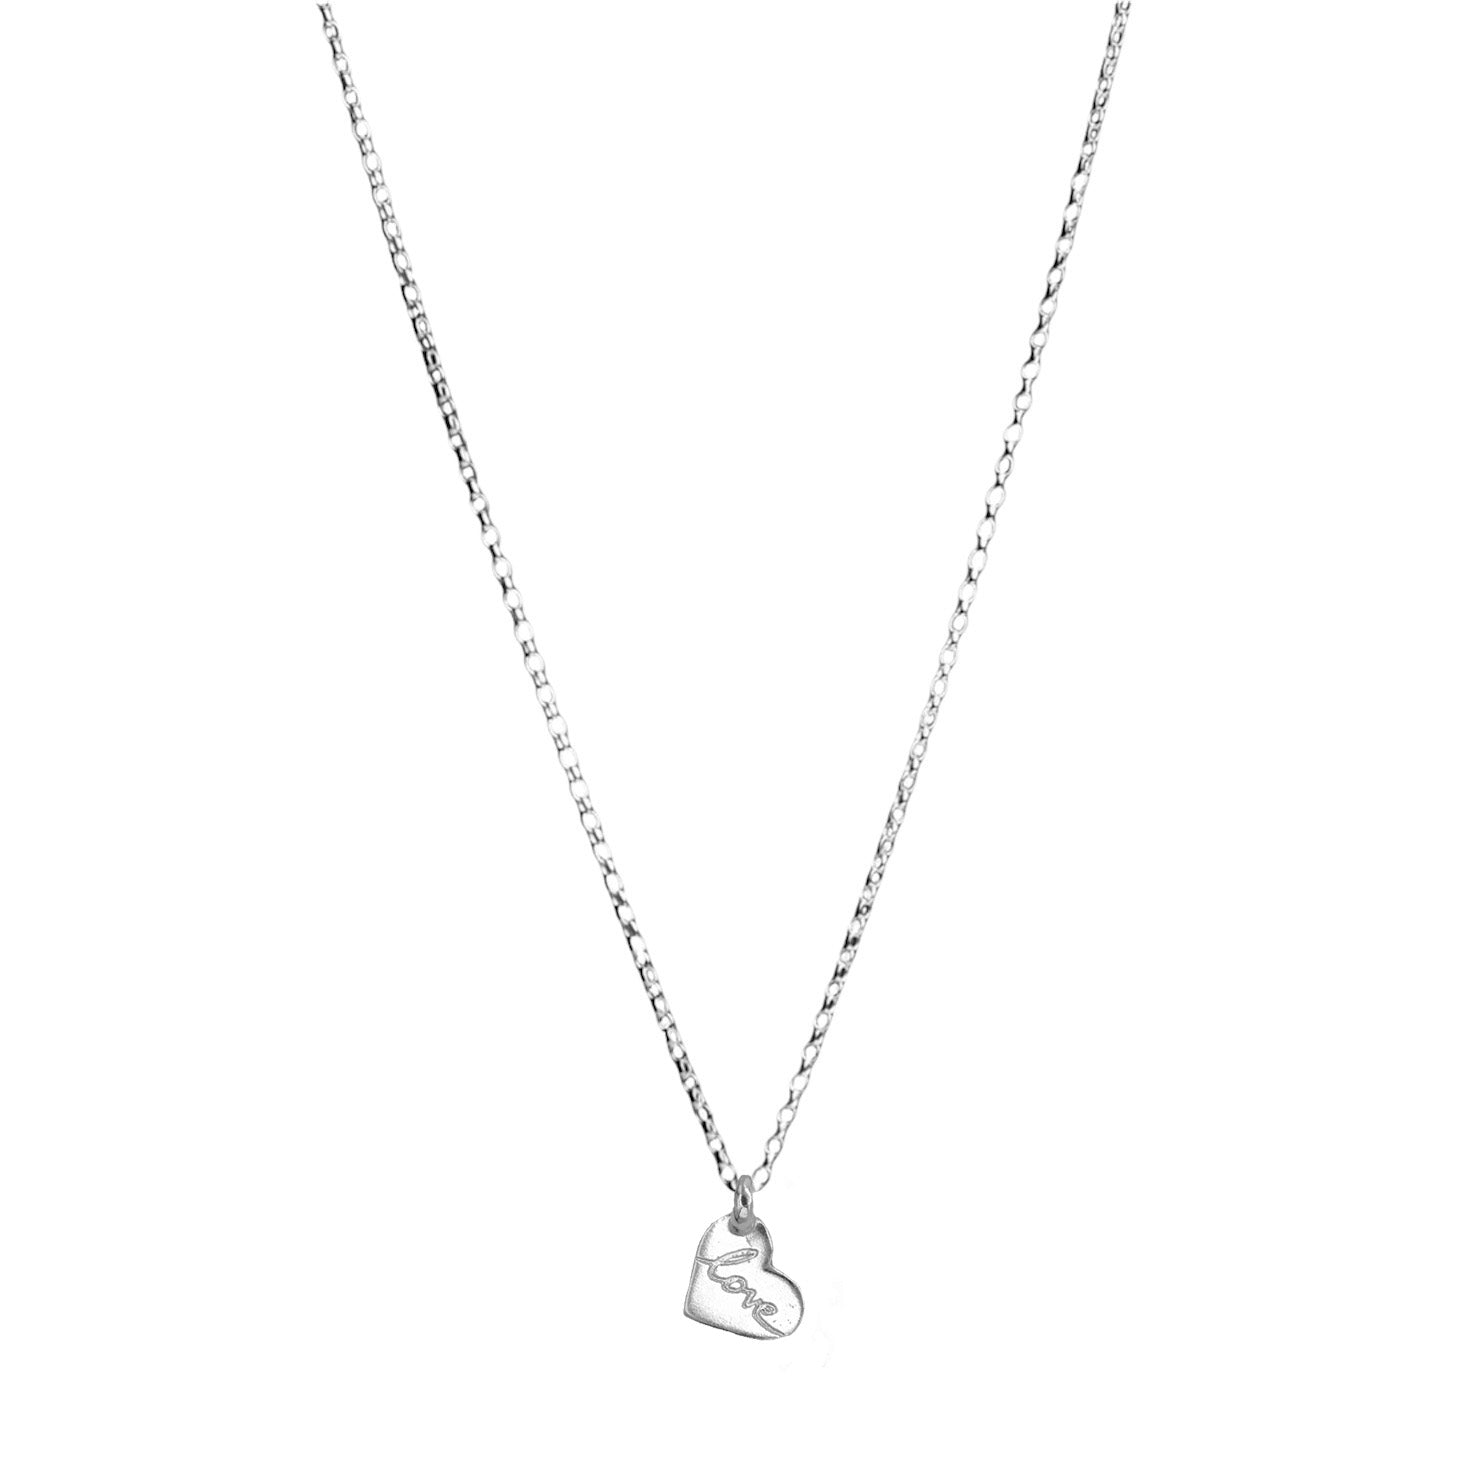 Love writing charm necklace